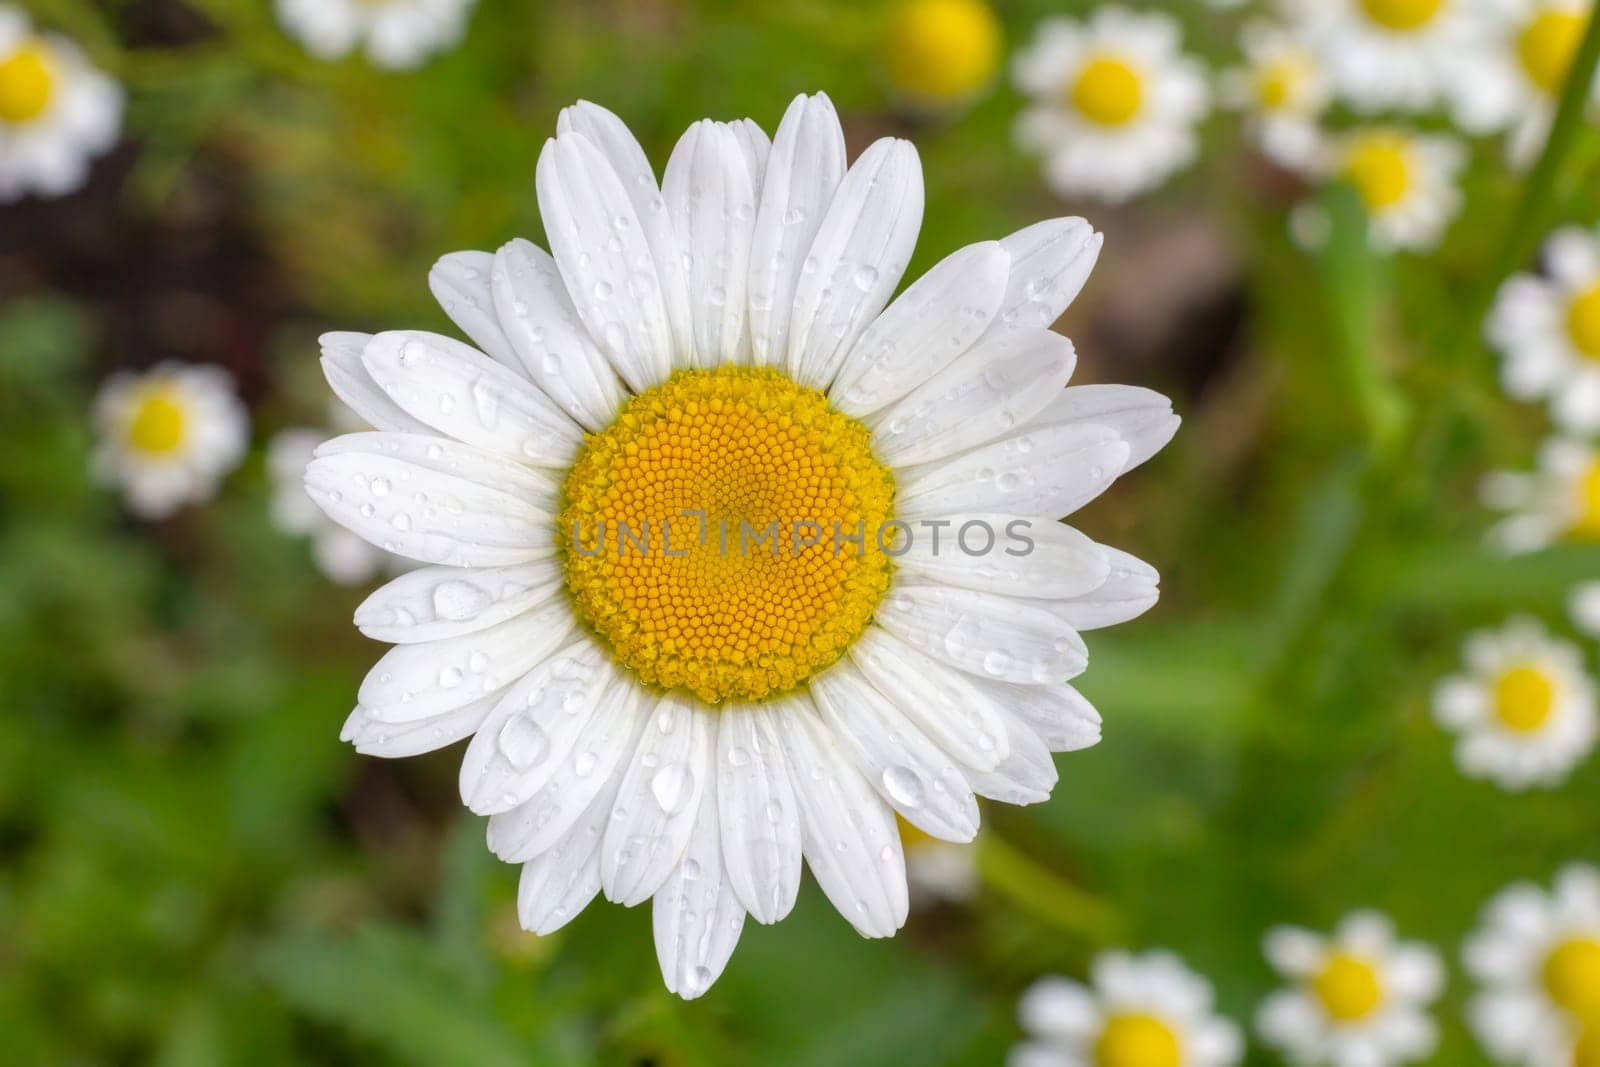 Bud of a chamomile flower in the garden with blurred same flowers in the background. Shallow depth of field.